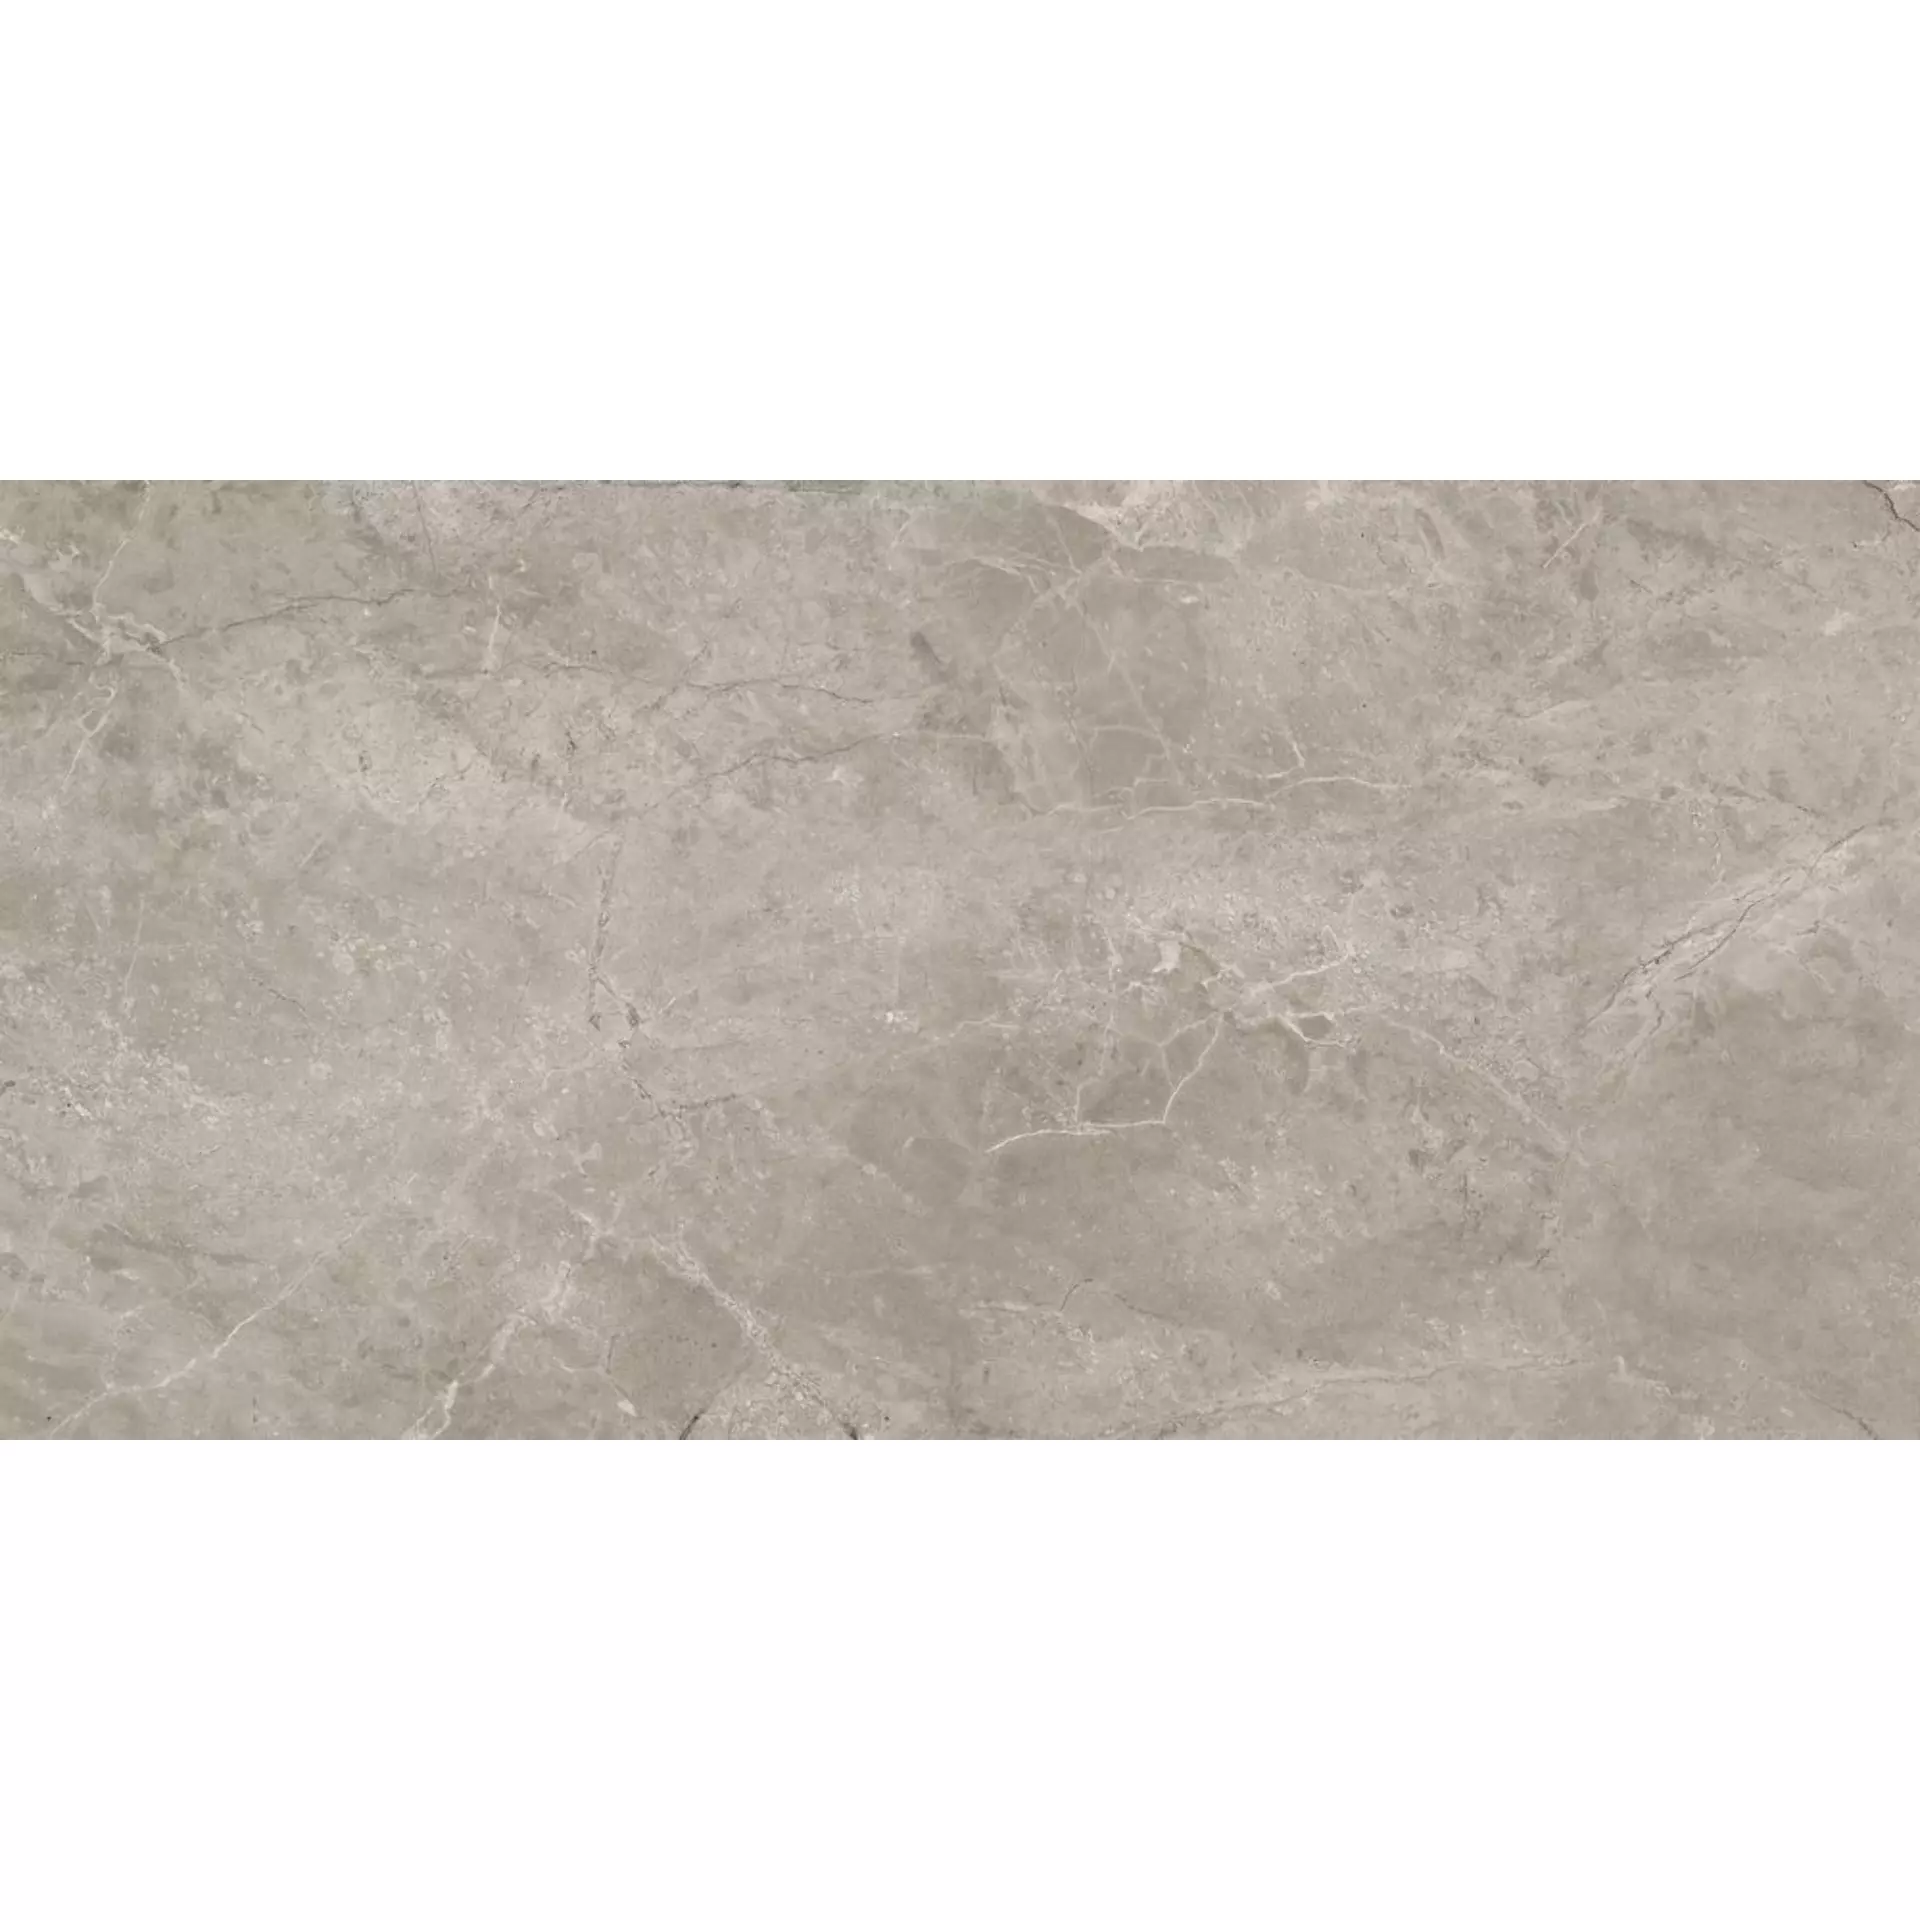 Blustyle Elite Fior Di Bosco Natural BGXEL20 60x120cm rectified 9,5mm